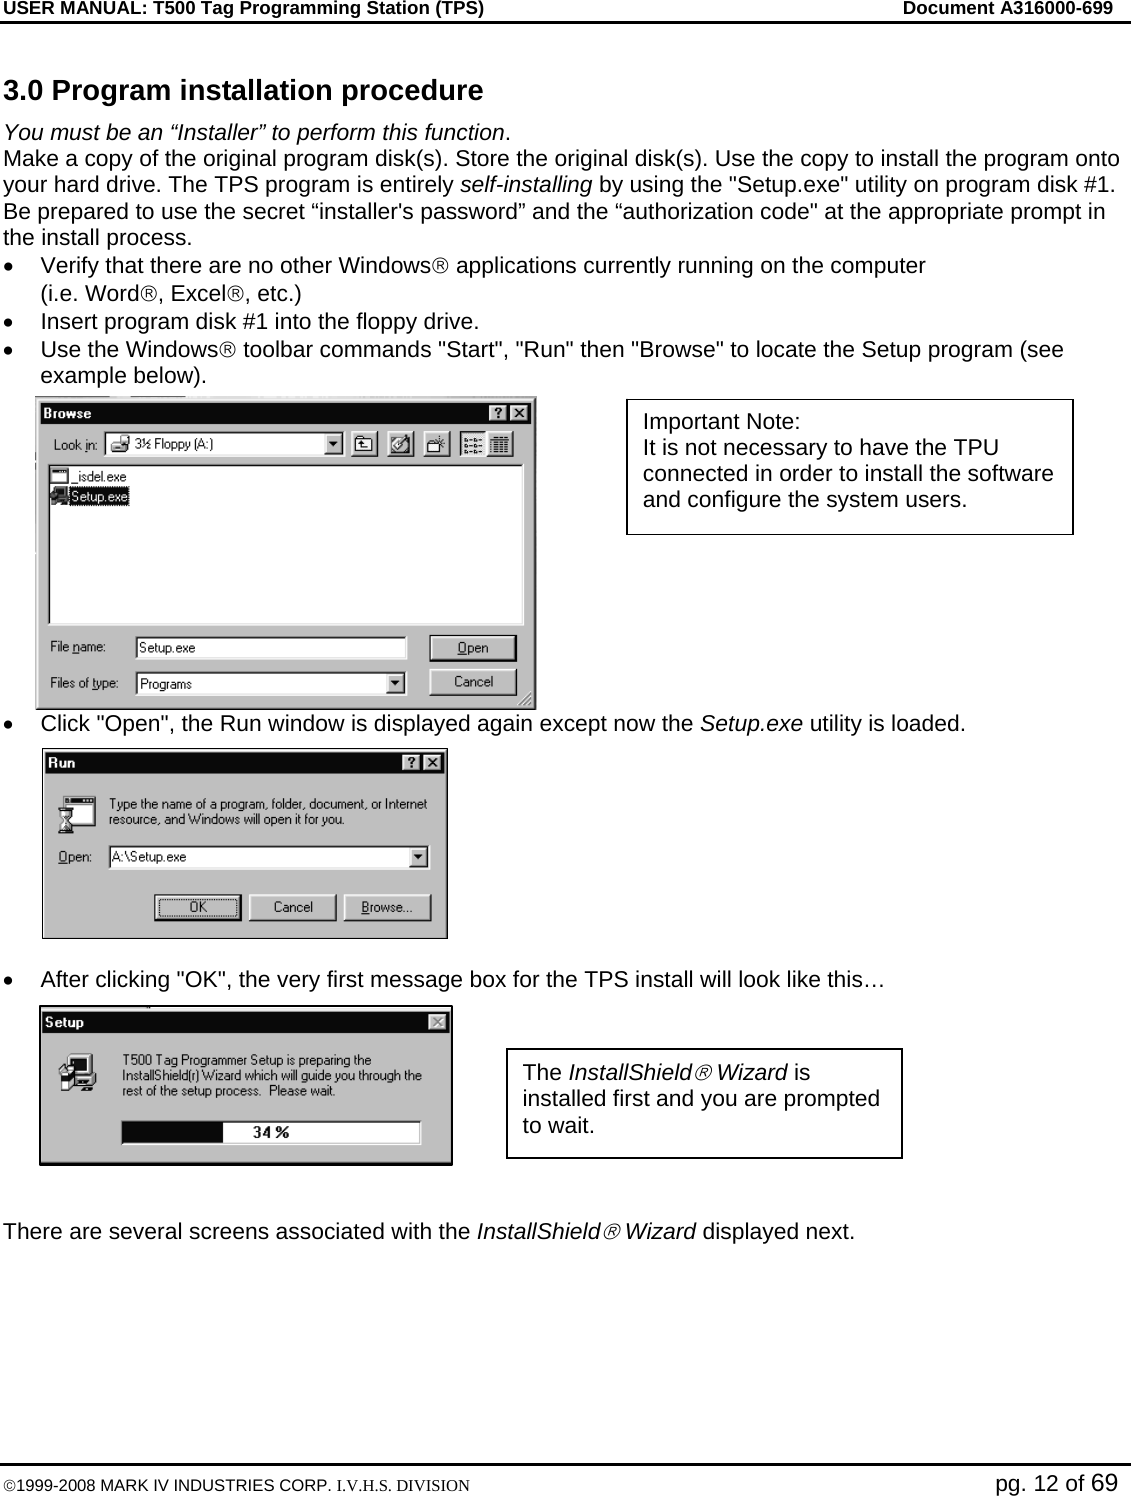 USER MANUAL: T500 Tag Programming Station (TPS)     Document A316000-699  ©1999-2008 MARK IV INDUSTRIES CORP. I.V.H.S. DIVISION   pg. 12 of 69 3.0 Program installation procedure You must be an “Installer” to perform this function.  Make a copy of the original program disk(s). Store the original disk(s). Use the copy to install the program onto your hard drive. The TPS program is entirely self-installing by using the &quot;Setup.exe&quot; utility on program disk #1. Be prepared to use the secret “installer&apos;s password” and the “authorization code&quot; at the appropriate prompt in the install process. •  Verify that there are no other Windows® applications currently running on the computer (i.e. Word®, Excel®, etc.) •  Insert program disk #1 into the floppy drive. •  Use the Windows® toolbar commands &quot;Start&quot;, &quot;Run&quot; then &quot;Browse&quot; to locate the Setup program (see example below). •  Click &quot;Open&quot;, the Run window is displayed again except now the Setup.exe utility is loaded.  •  After clicking &quot;OK&quot;, the very first message box for the TPS install will look like this…   There are several screens associated with the InstallShield® Wizard displayed next.     The InstallShield® Wizard is installed first and you are prompted to wait. Important Note:  It is not necessary to have the TPU connected in order to install the software and configure the system users. 